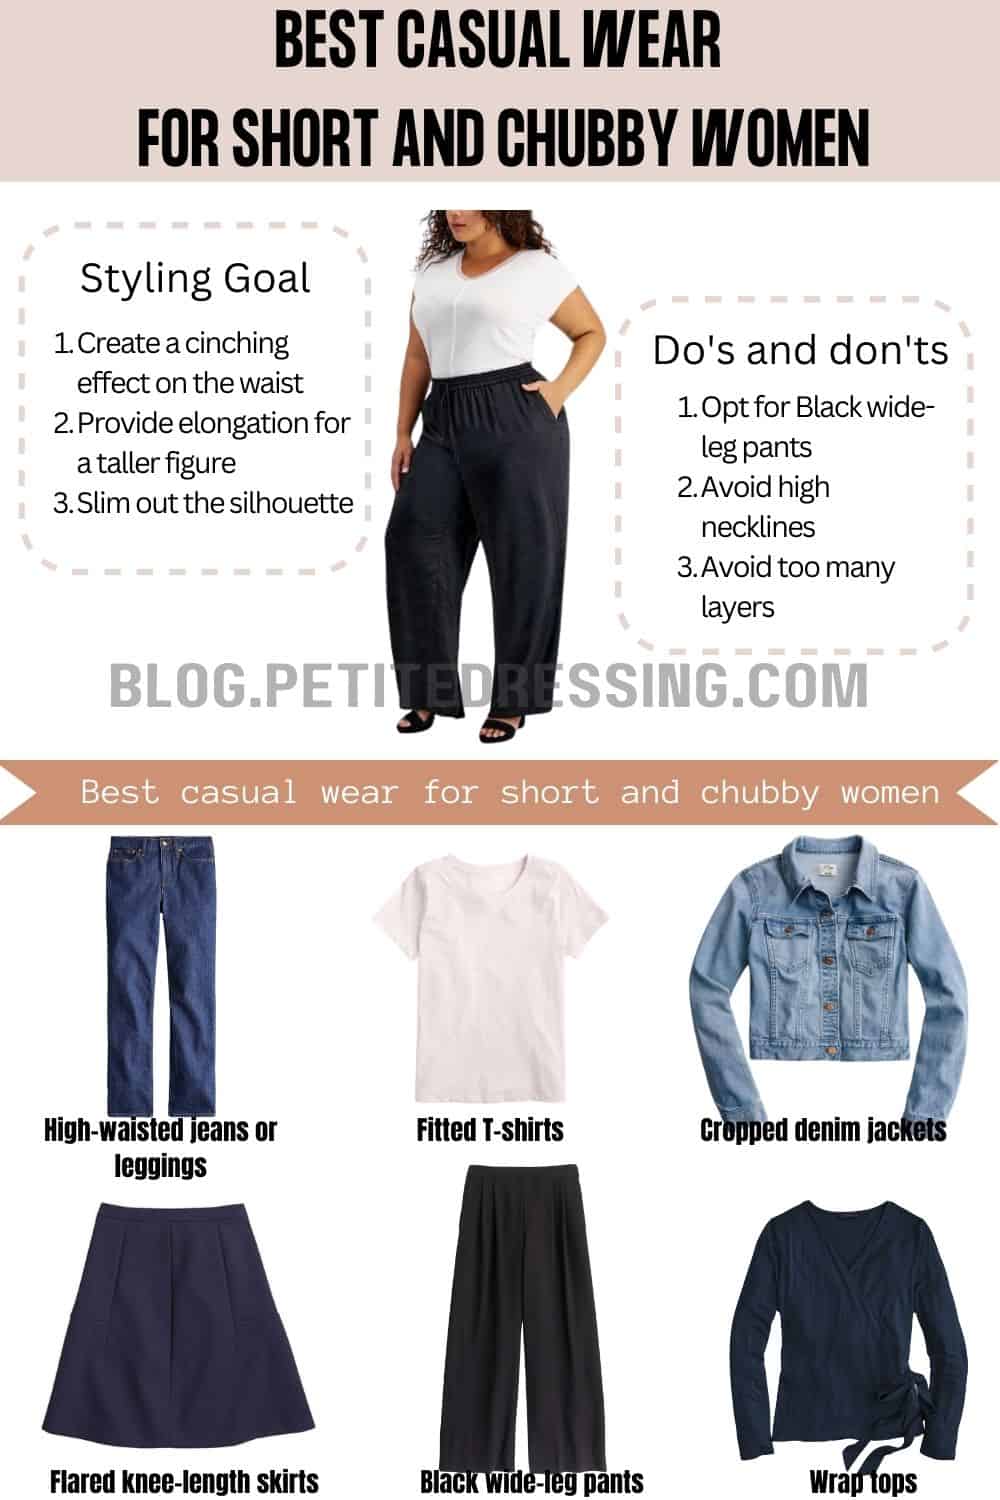 Casual wear guide for short and chubby